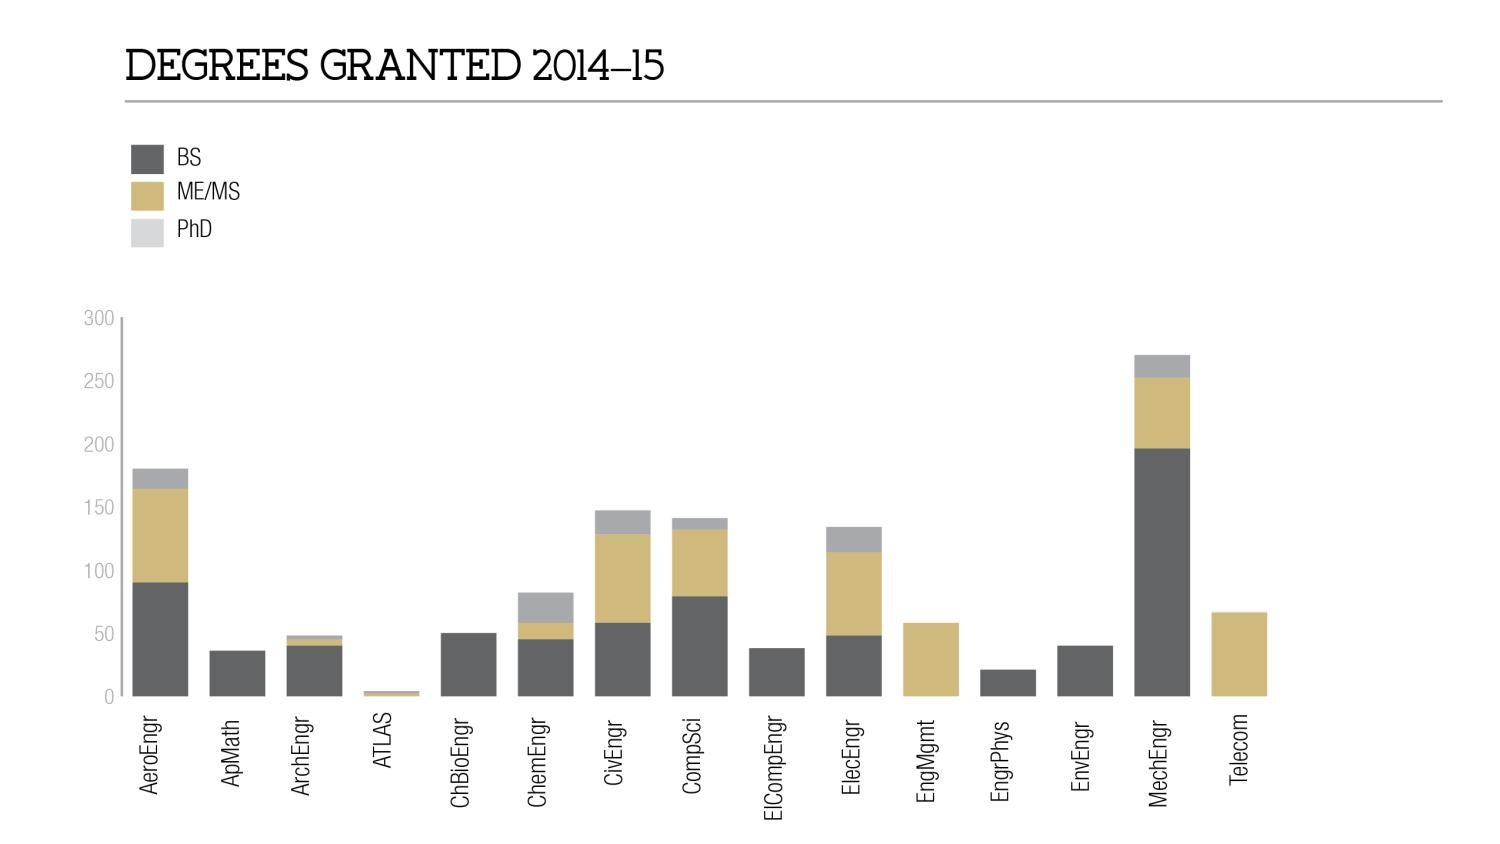 Degrees Granted 2014-15 by Major